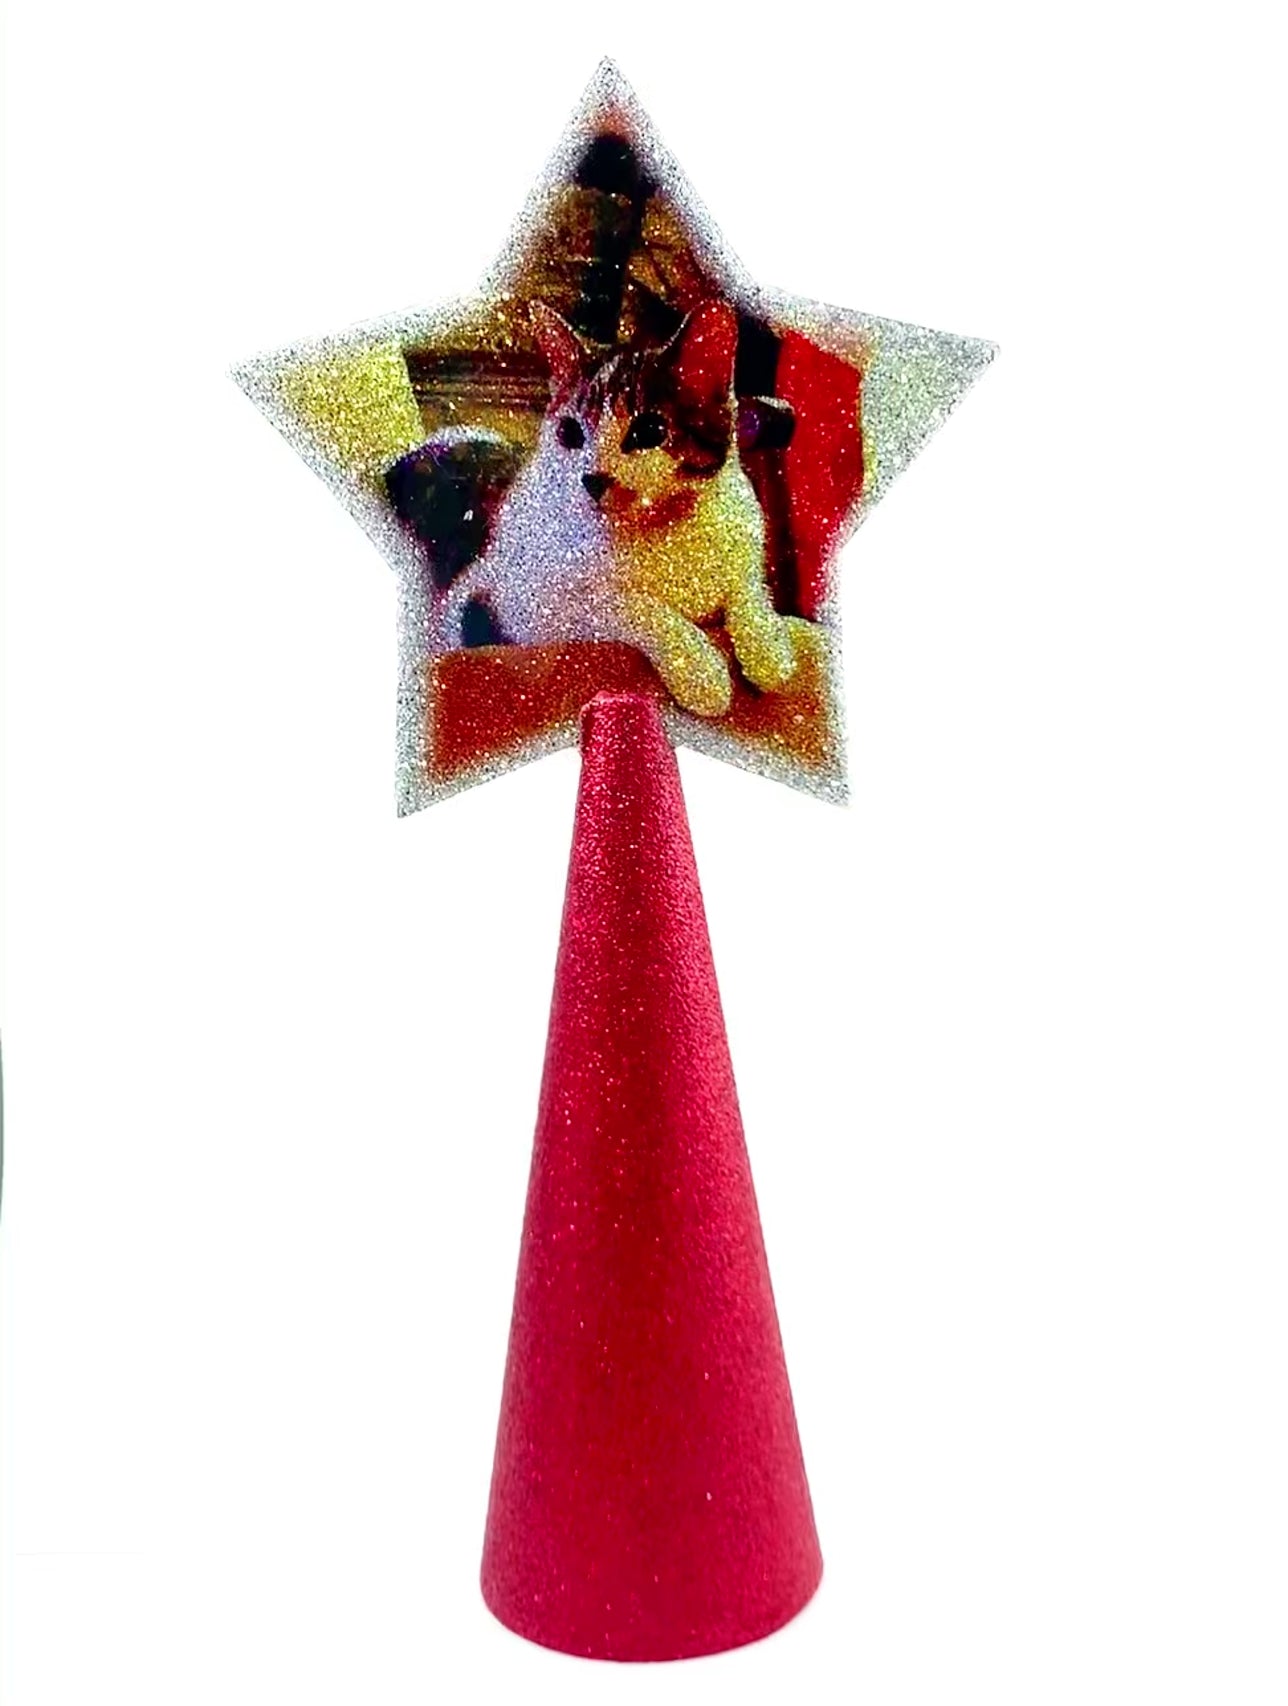 Video of double-sided custom tree topper with 2 cat images on red glitter cone